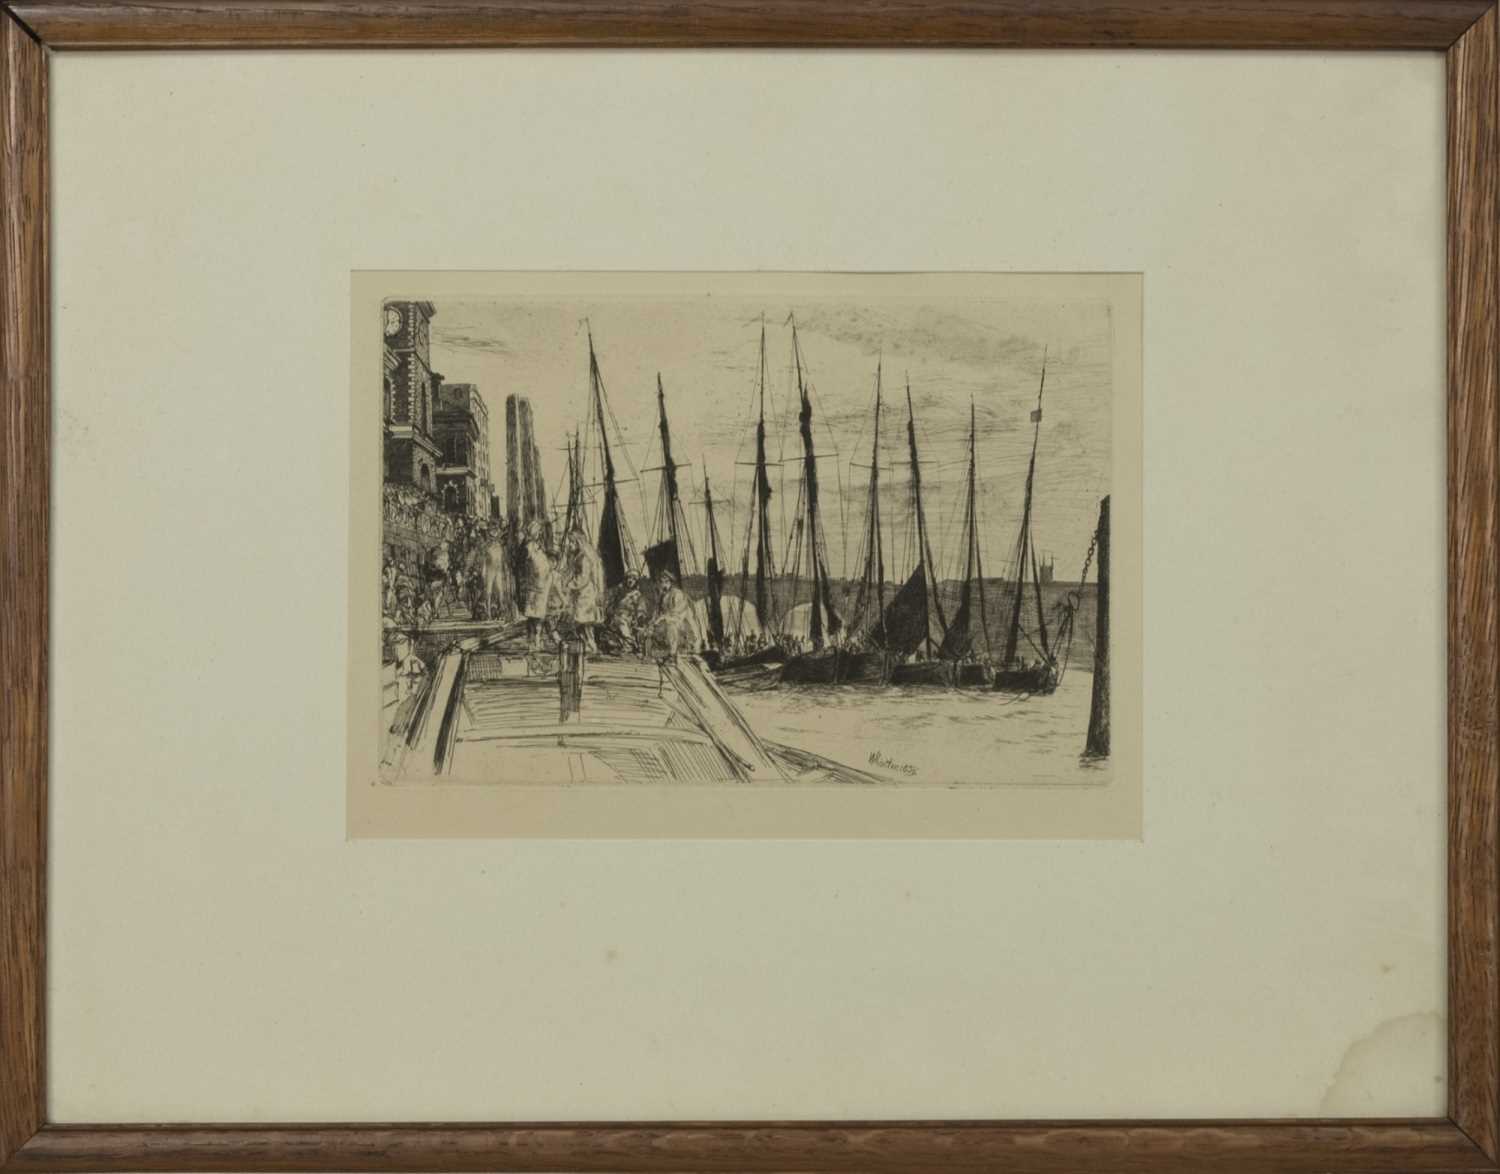 Lot 410 - AT DOCK, AN ETCHING BY JAMES ABBOTT MCNEILL WHISTLER